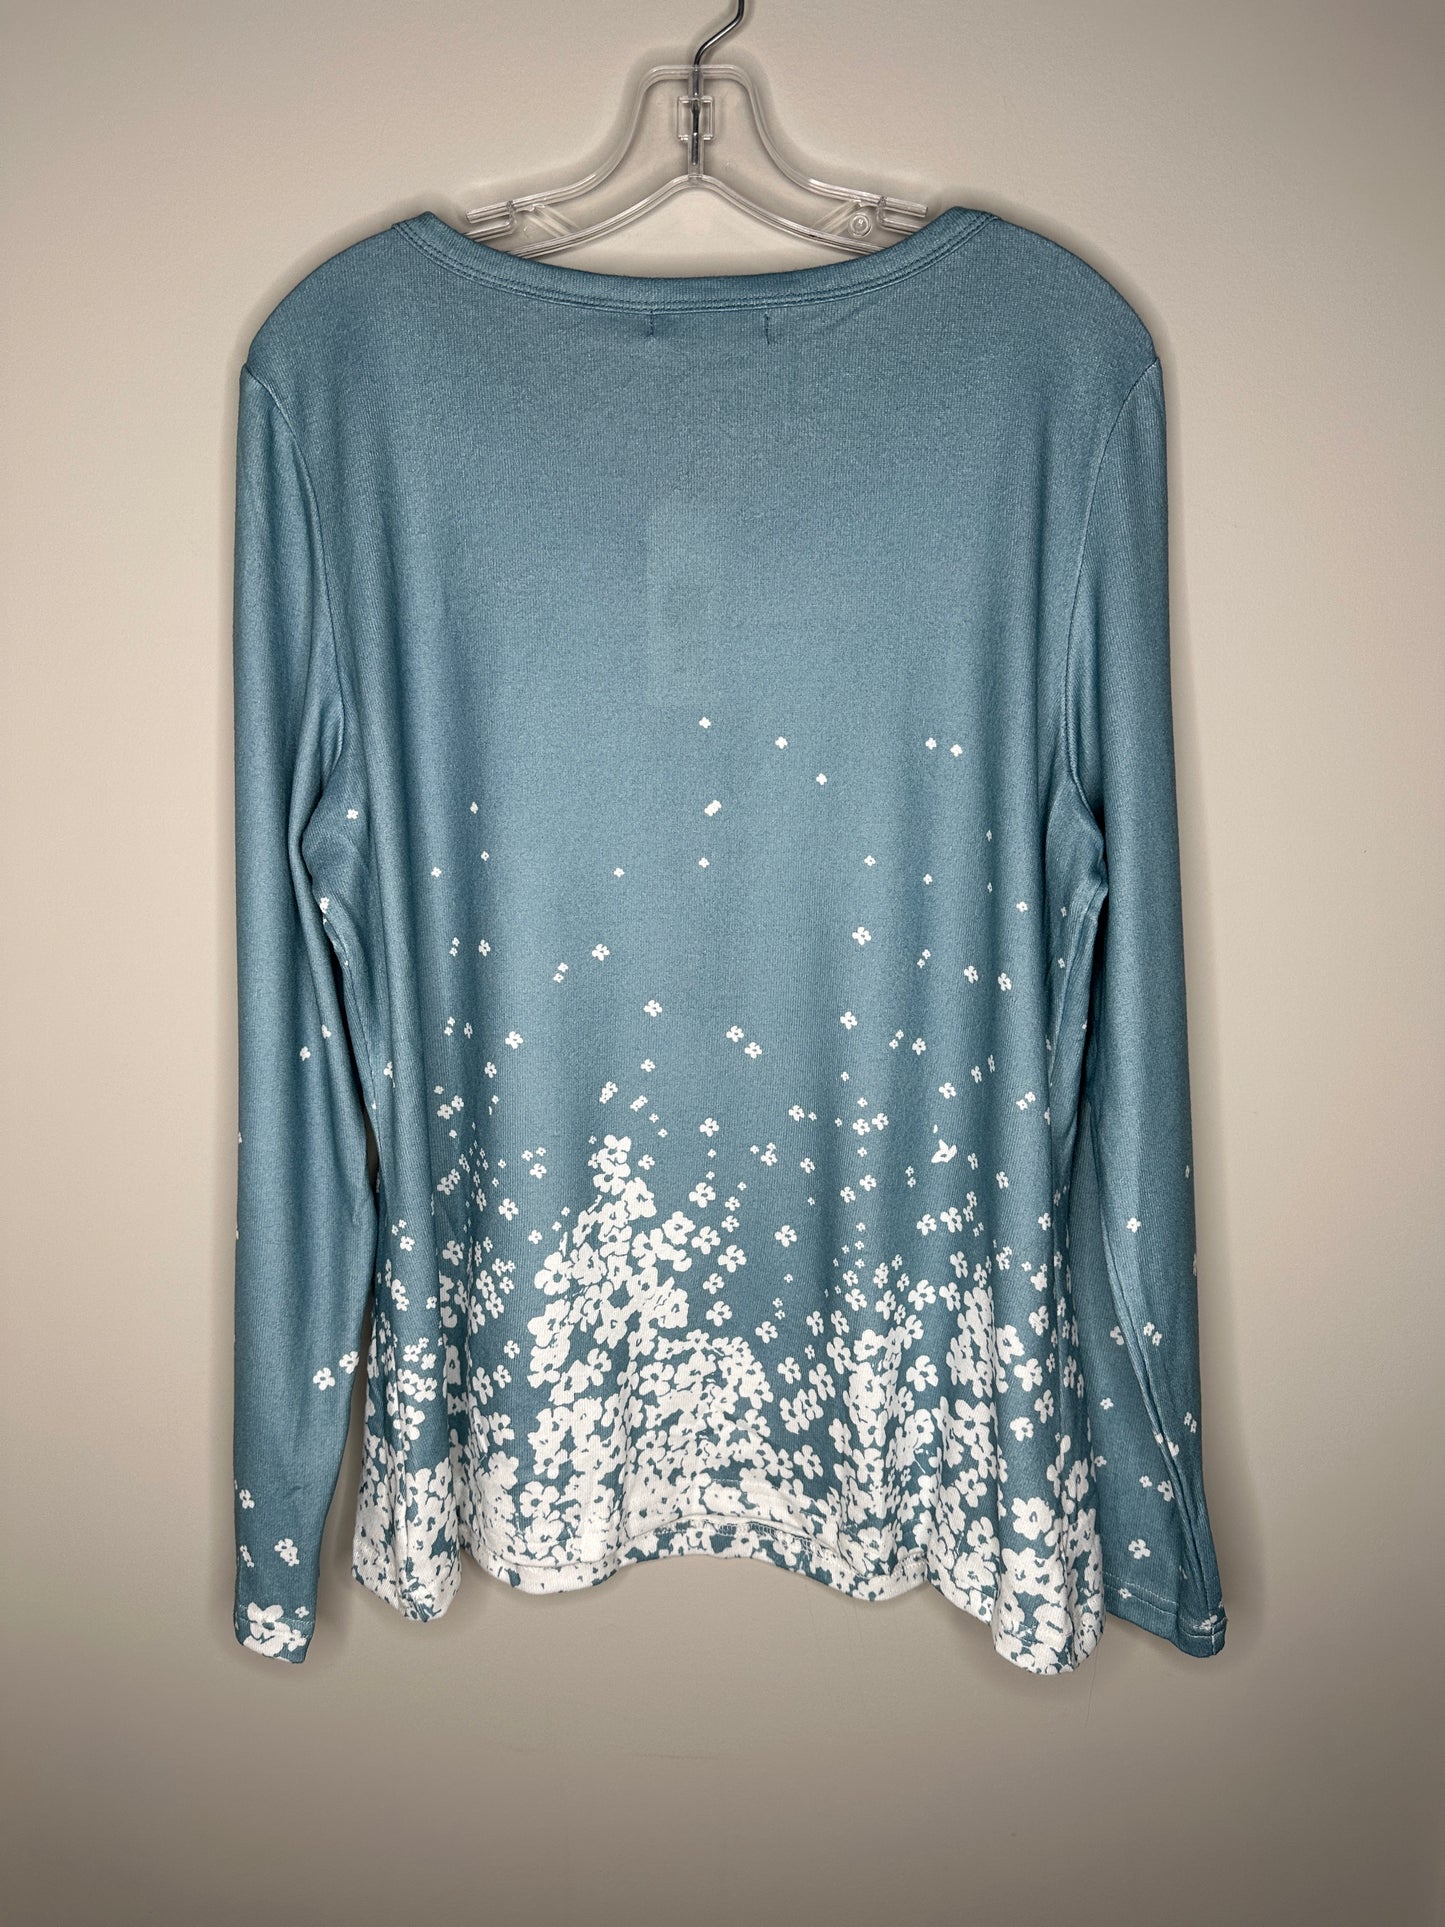 Noracora Size XXL (16) Light Blue w/White Flowers Long Sleeve Tunic Top, new/NWT